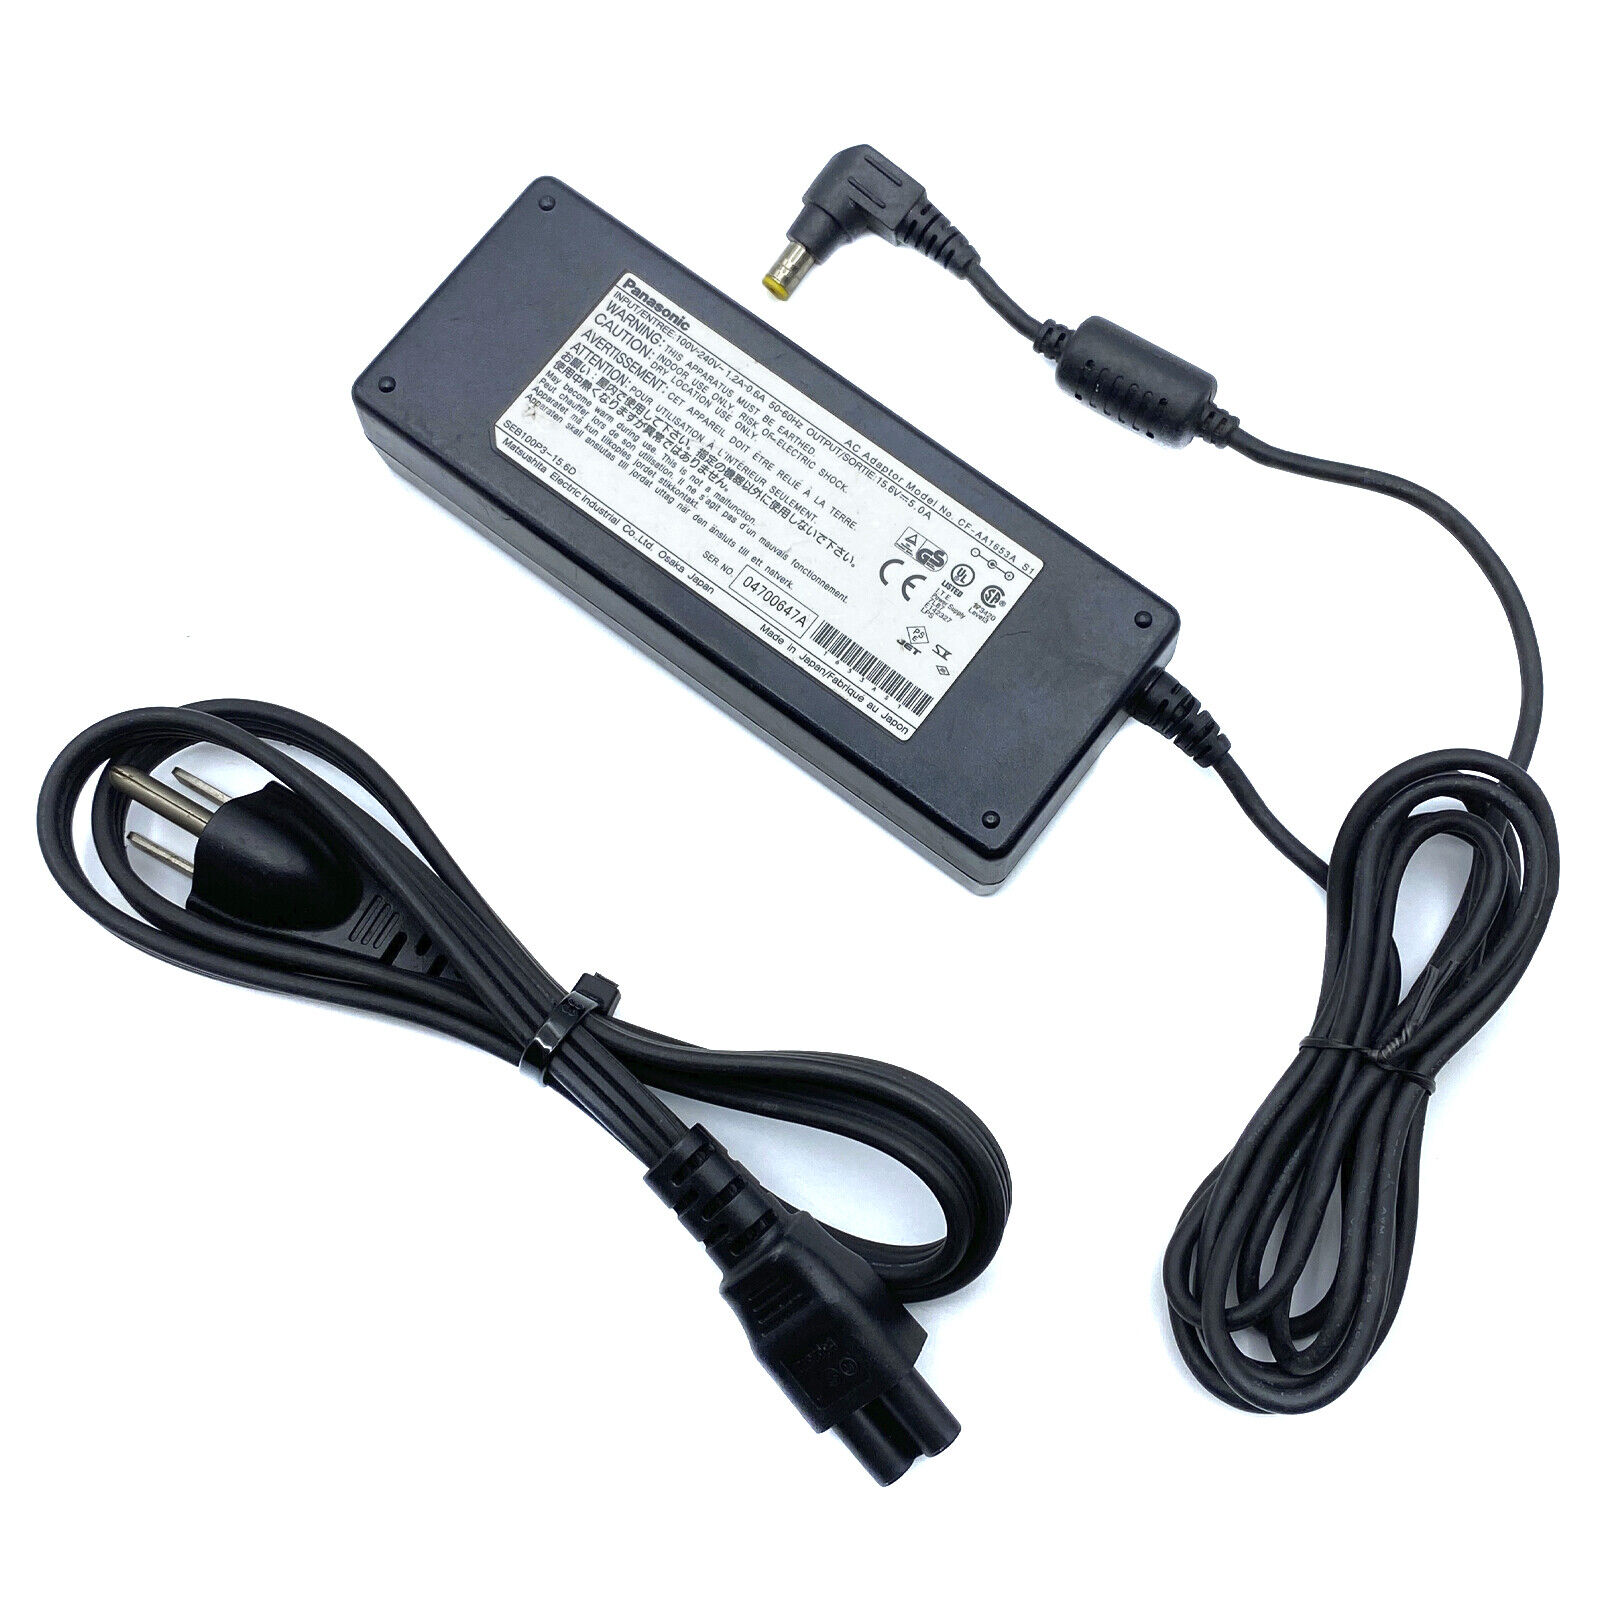 Genuine Panasonic AC Power Supply Adapter for Toughbook Laptop CF-19 CF-20 w/PC